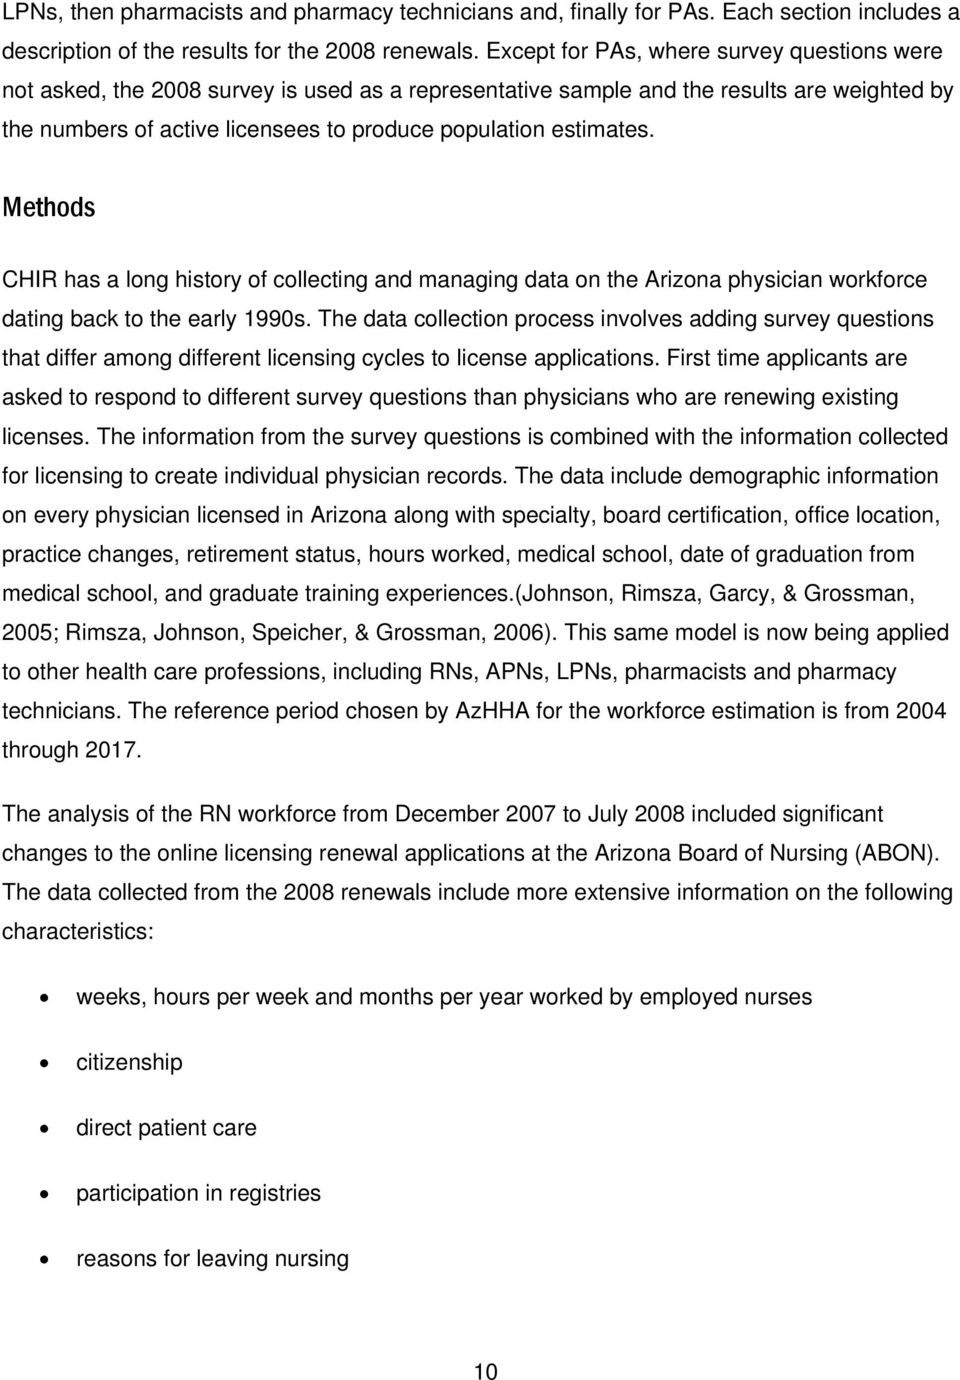 estimates. Methods CHIR has a long history of collecting and managing data on the Arizona physician workforce dating back to the early 1990s.